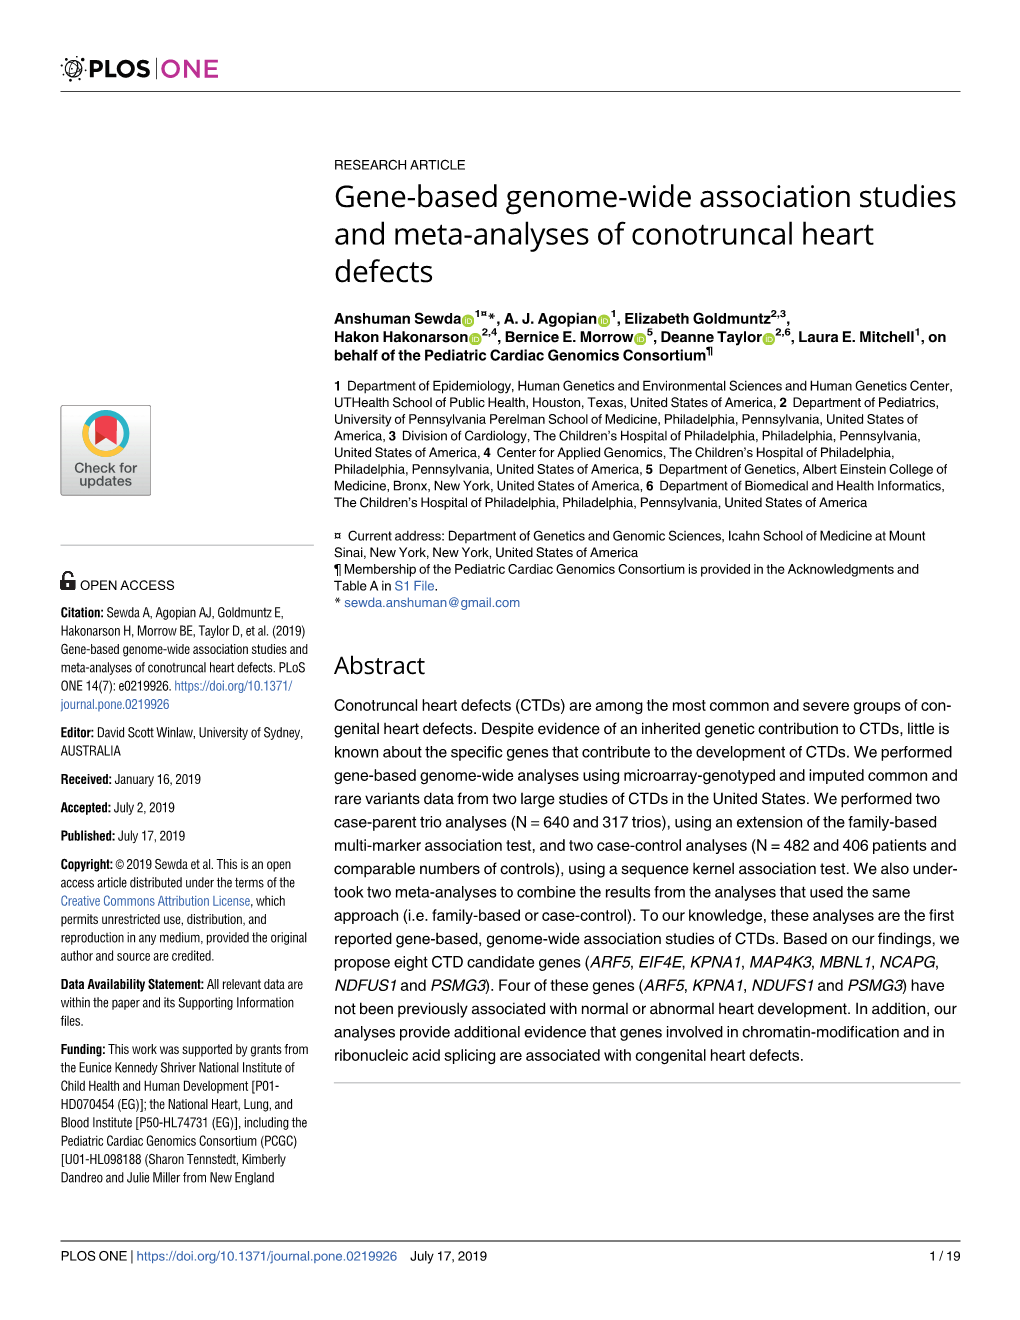 Gene-Based Genome-Wide Association Studies and Meta-Analyses of Conotruncal Heart Defects